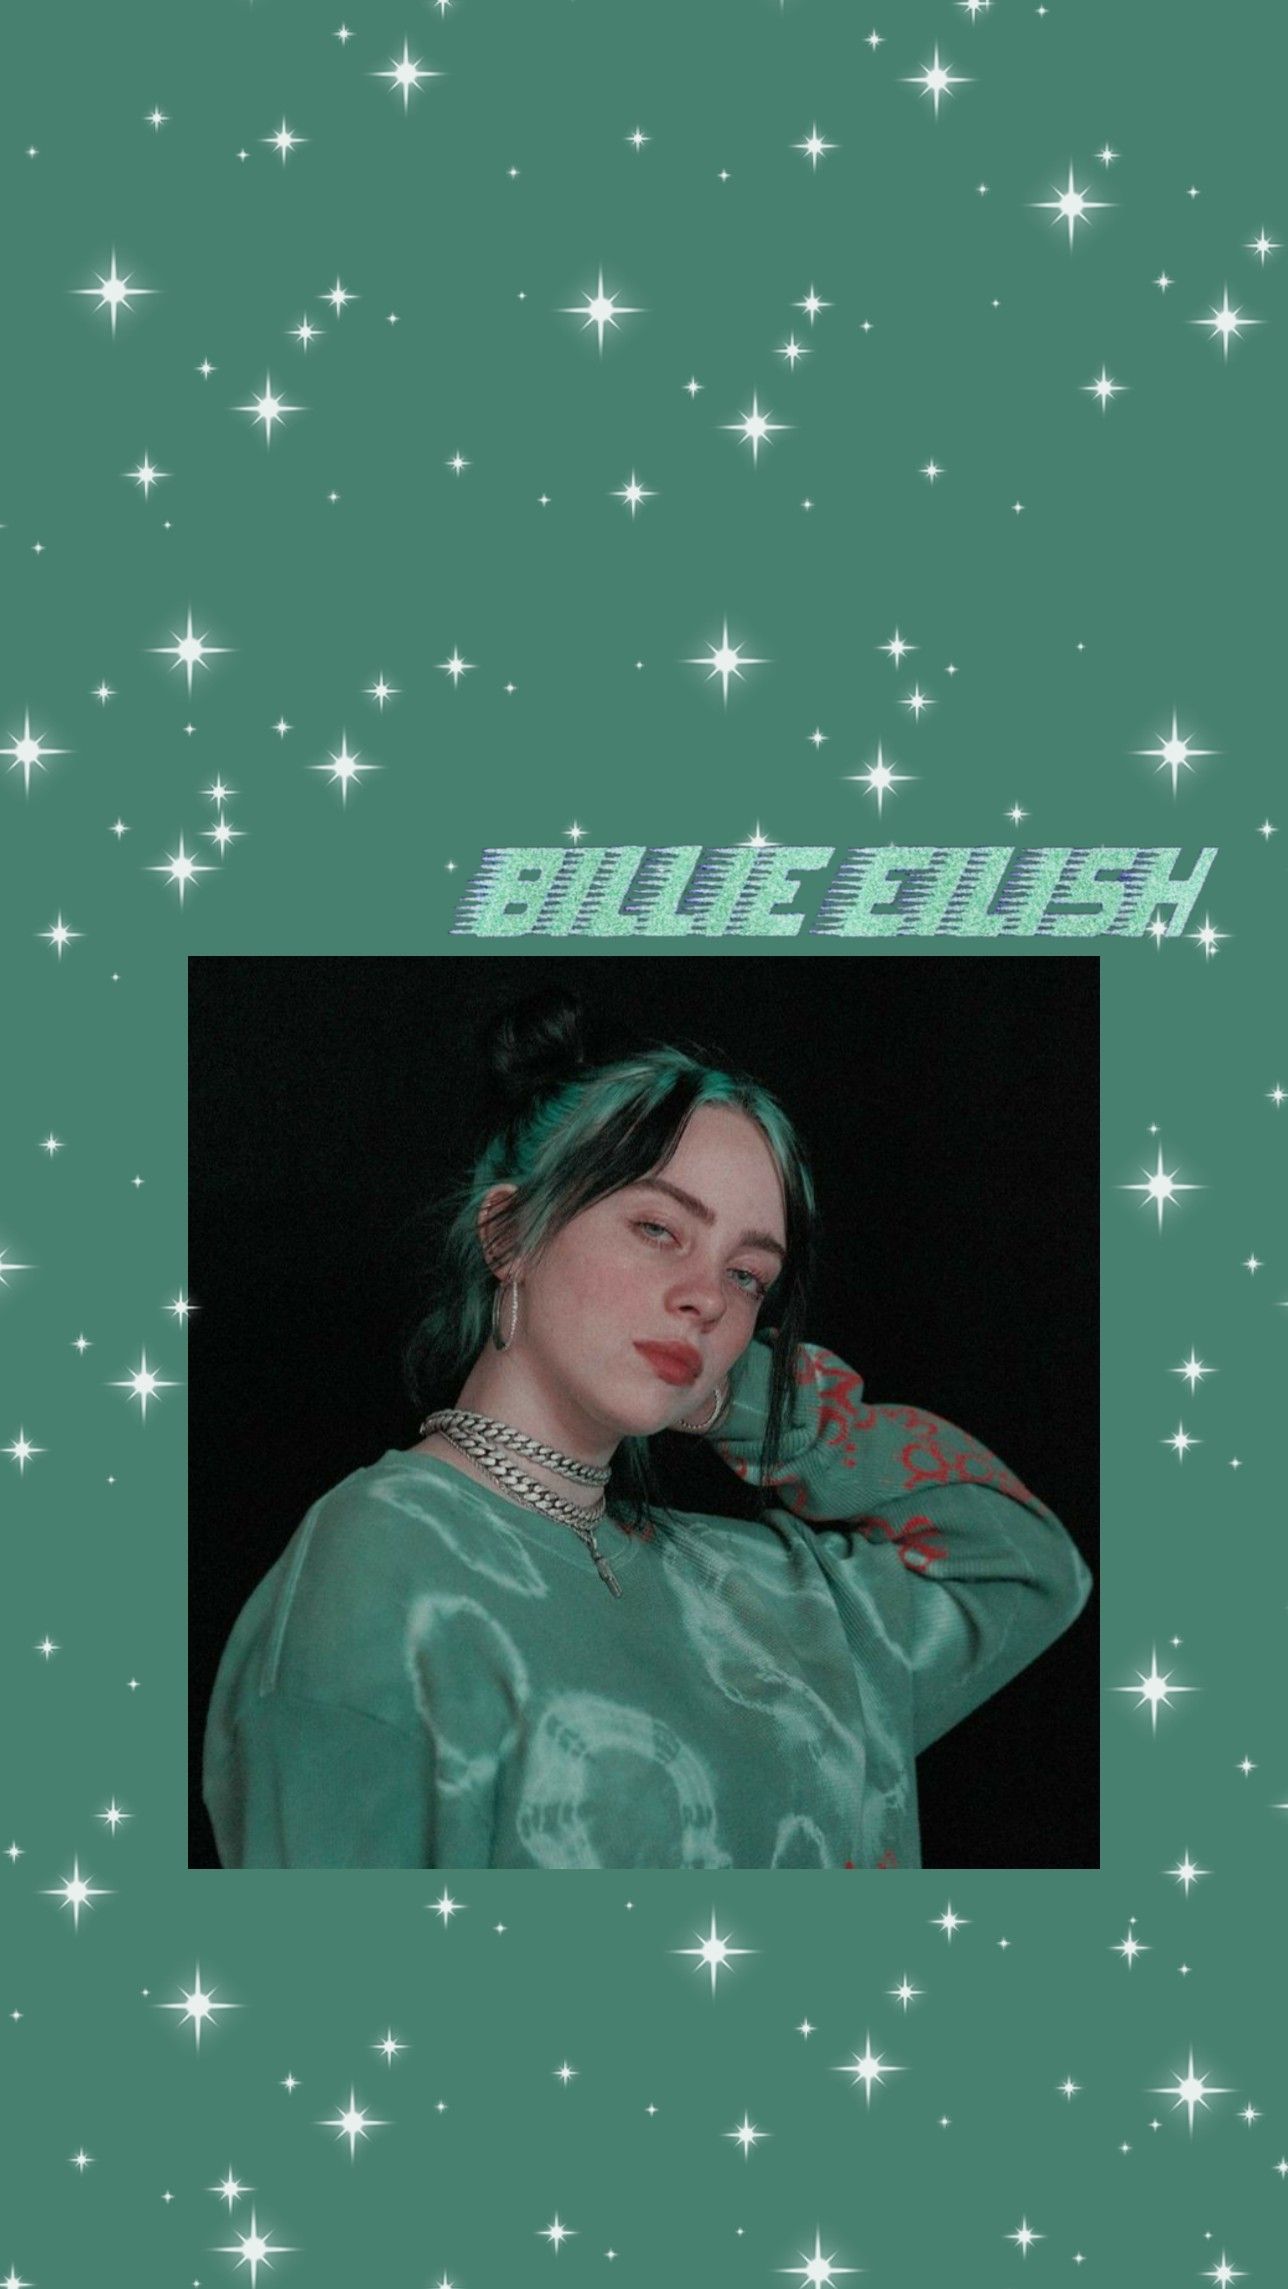 A girl with green hair and stars on her face - Billie Eilish